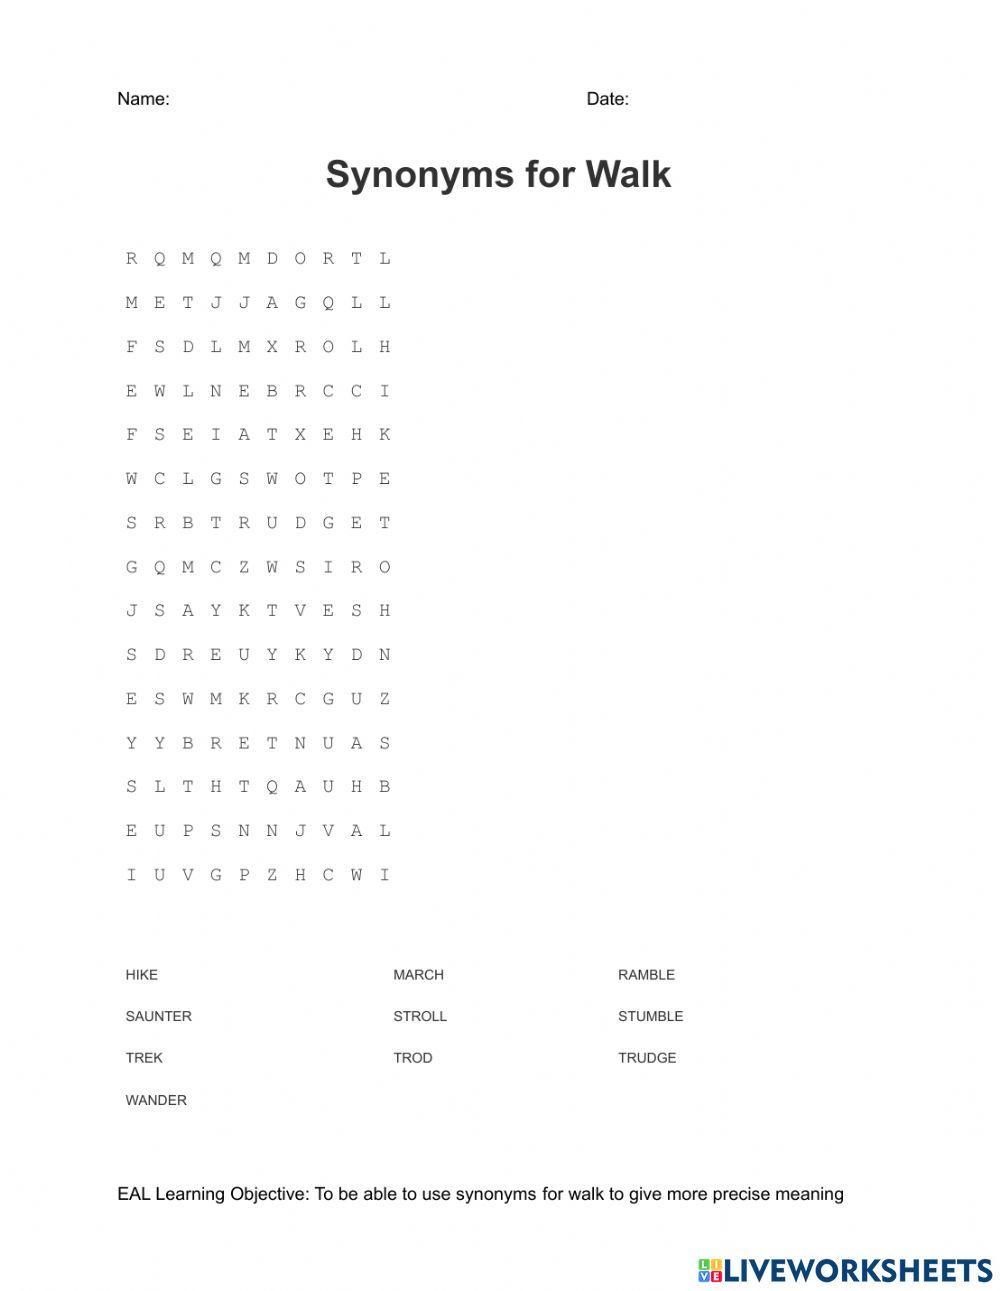 Synonyms for Walk and Run